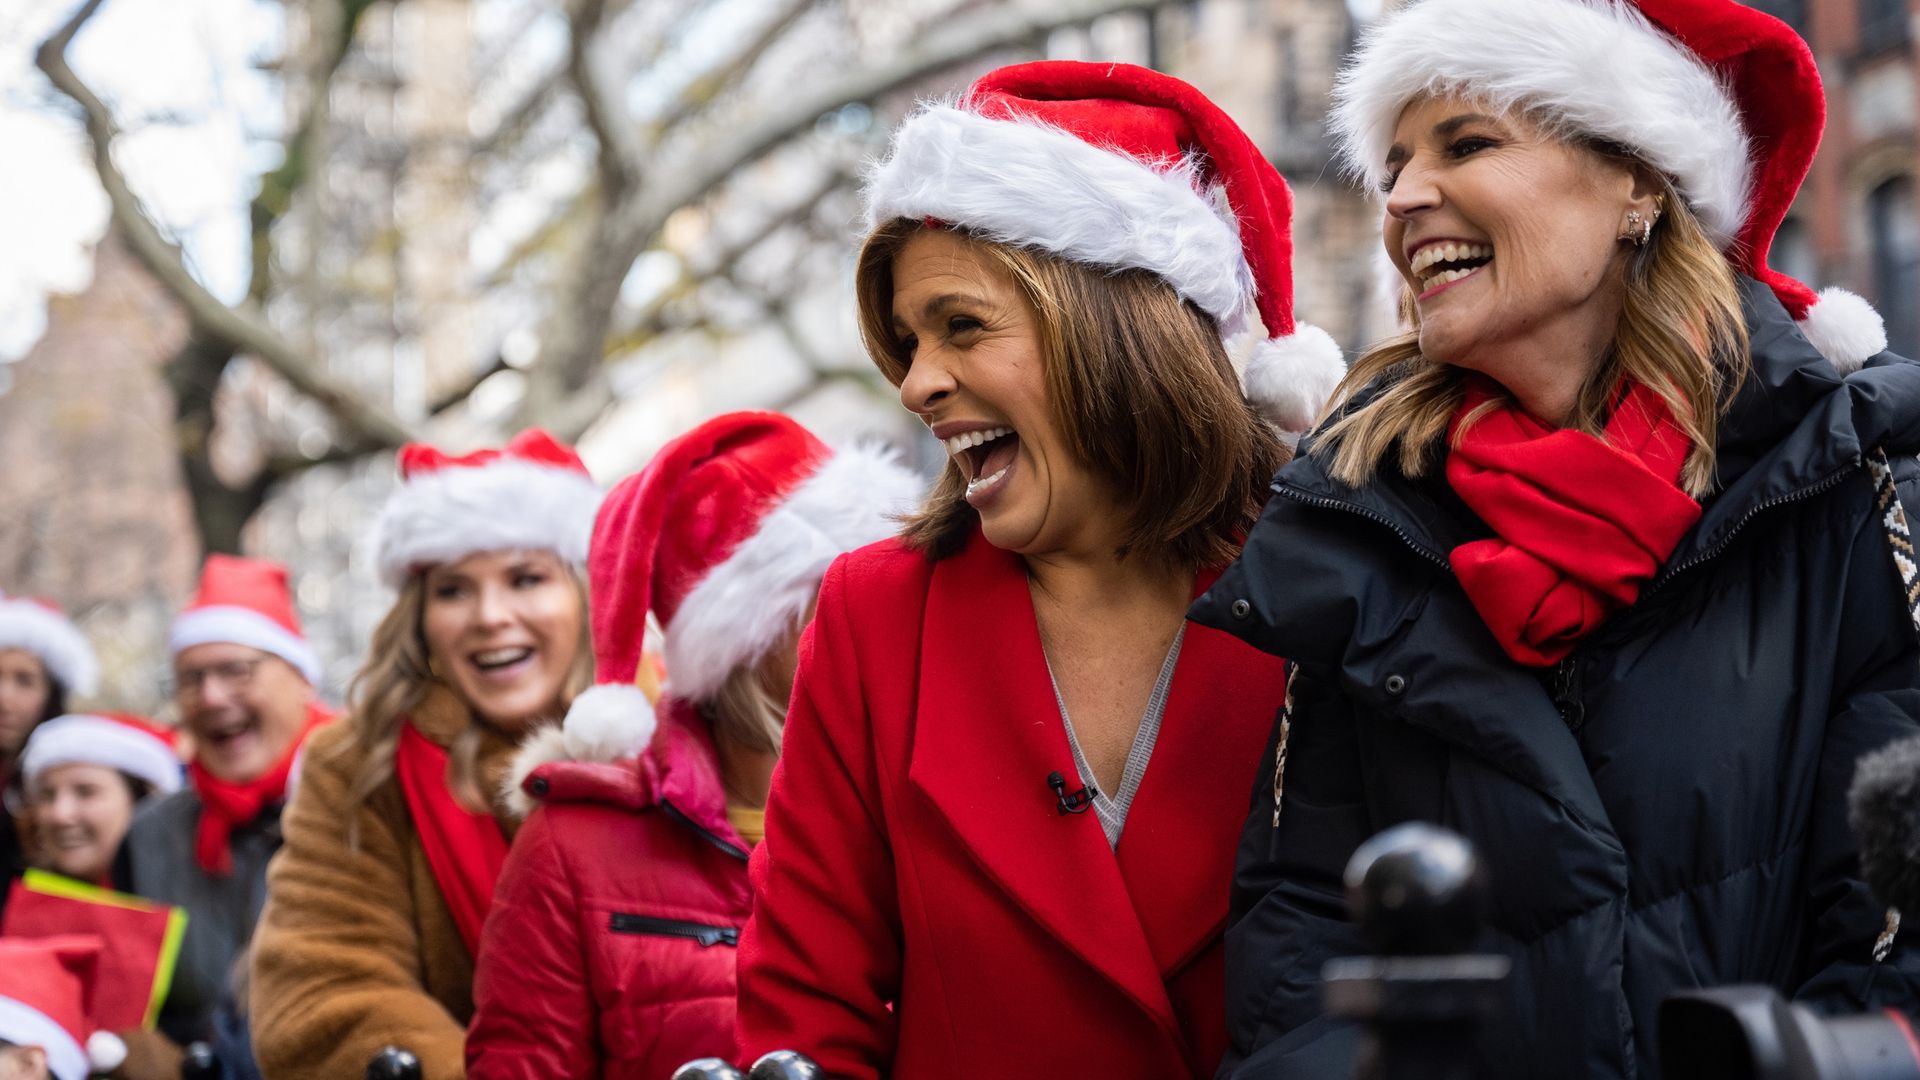 Jenna Bush Hager, Hoda Kotb, Savannah Guthrie, and other TODAY staff surprise Al Roker, singing christmas songs and giving well wishes for his recovery on Wednesday, December 14, 2022